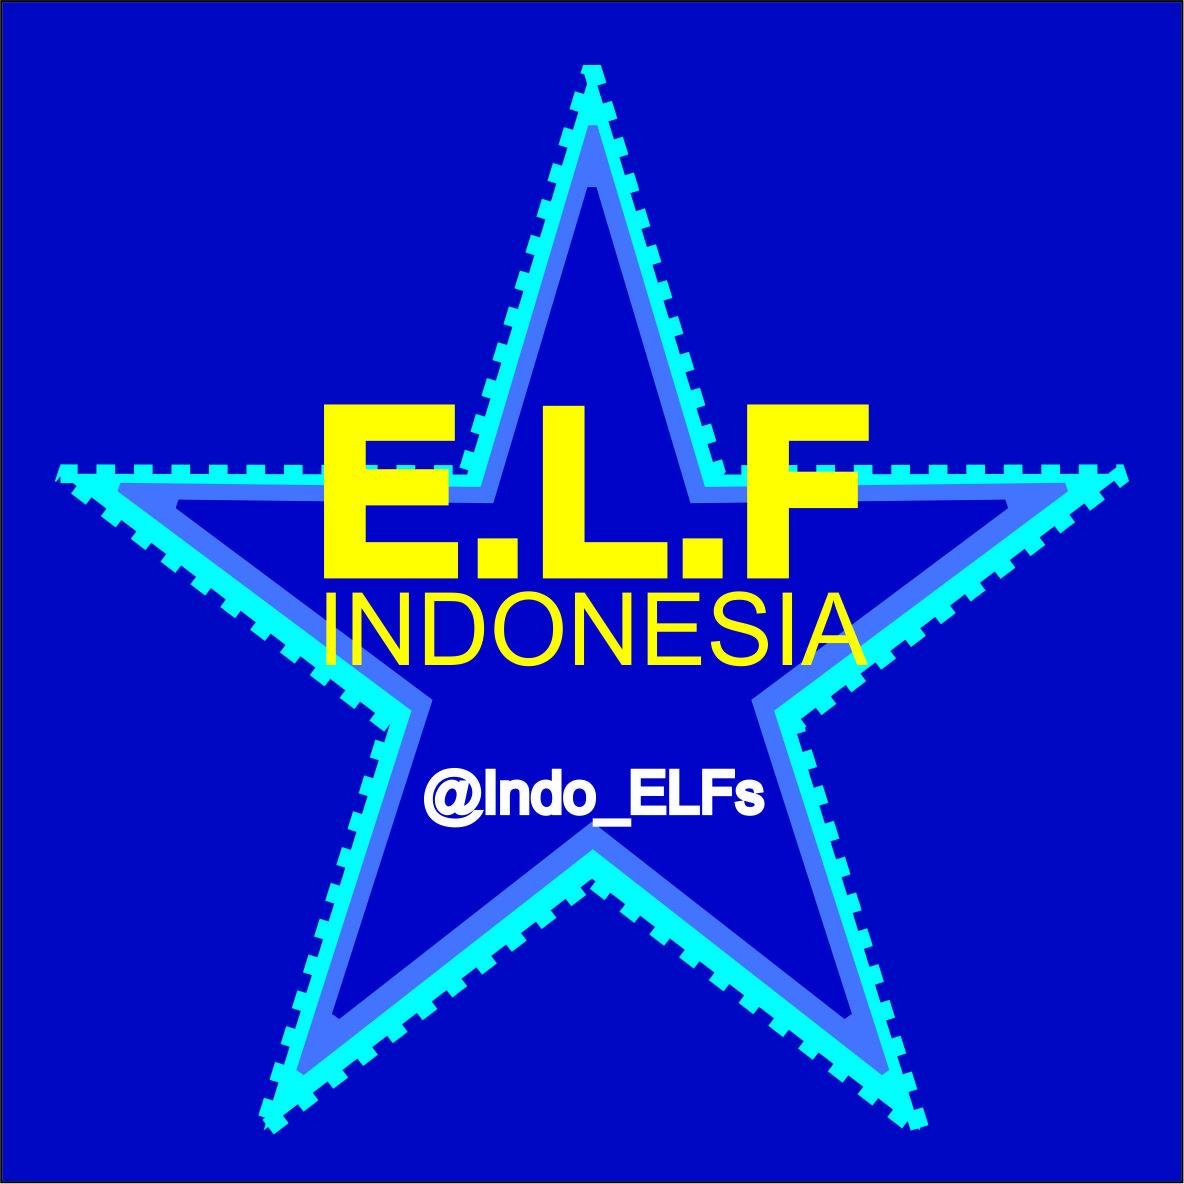 Super Junior Indonesia Fanbase  Contact: indoelfsproject@gmail.com Please keep supporting SJ and us! ^^

https://t.co/PVwvxcRp1c